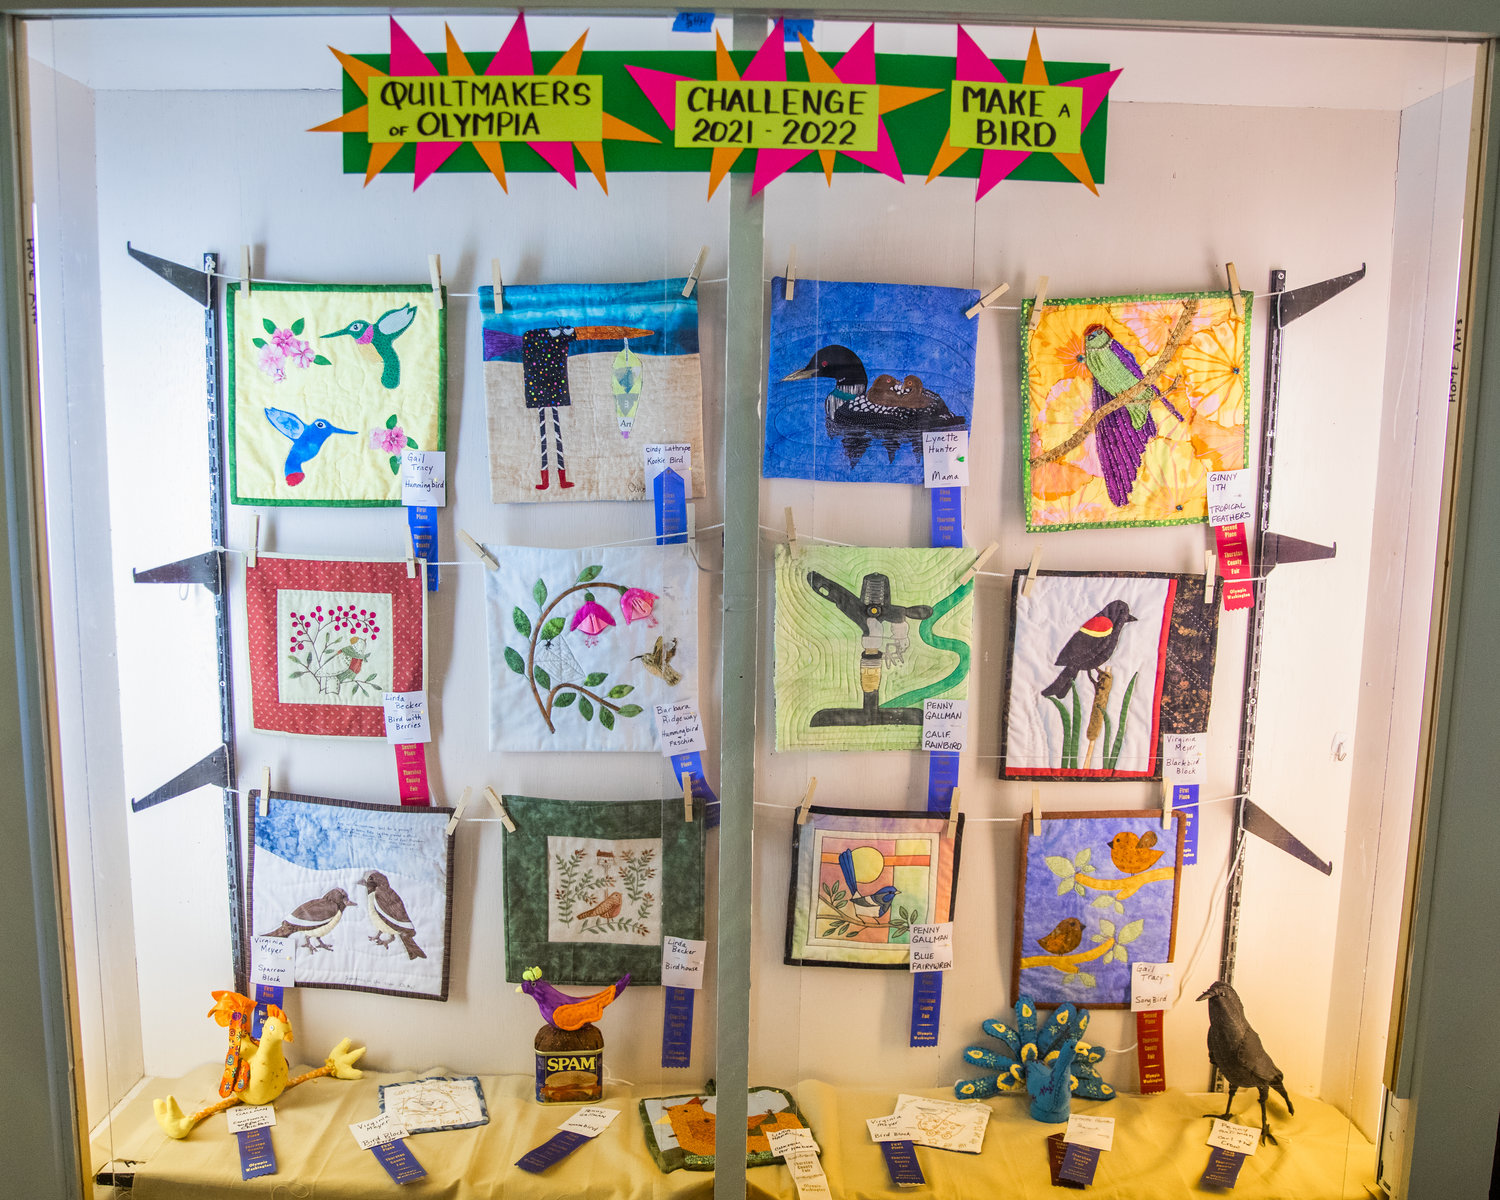 The Quiltmakers of Olympia challenge was “Make a Bird,” on display during the Thurston County Fair on Thursday in the Home Arts building.